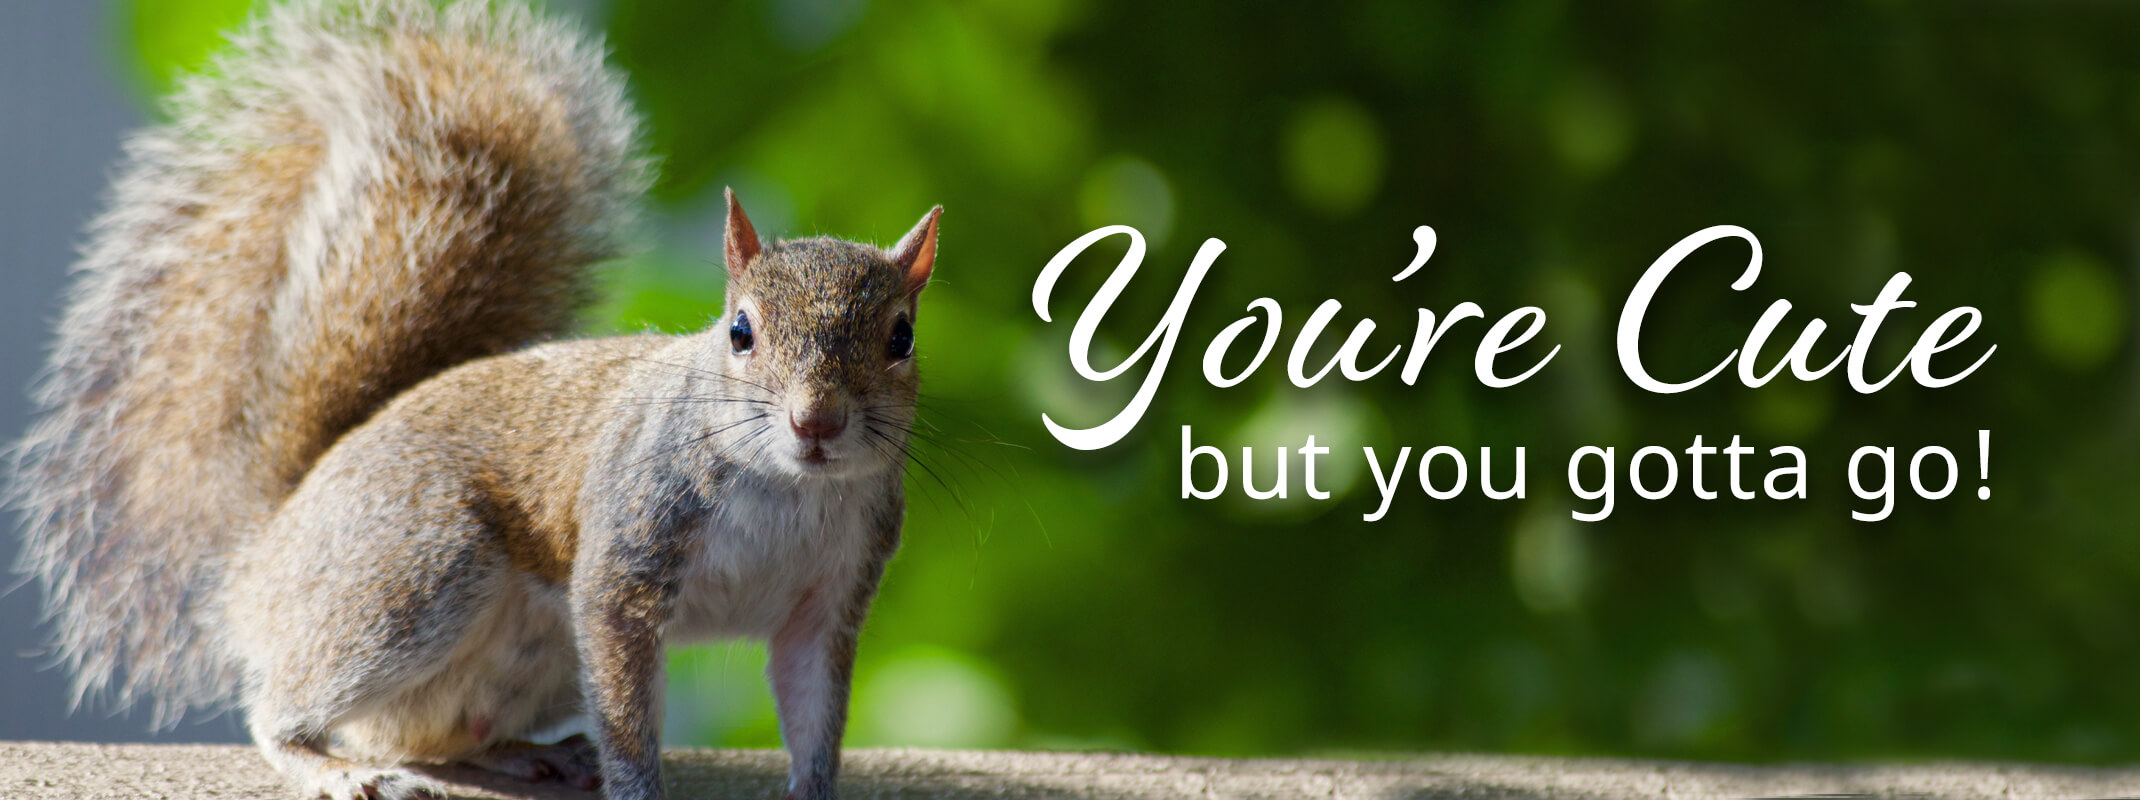 squirrel starring at you on wooden fence with the words you're cute but gotta go on the image 